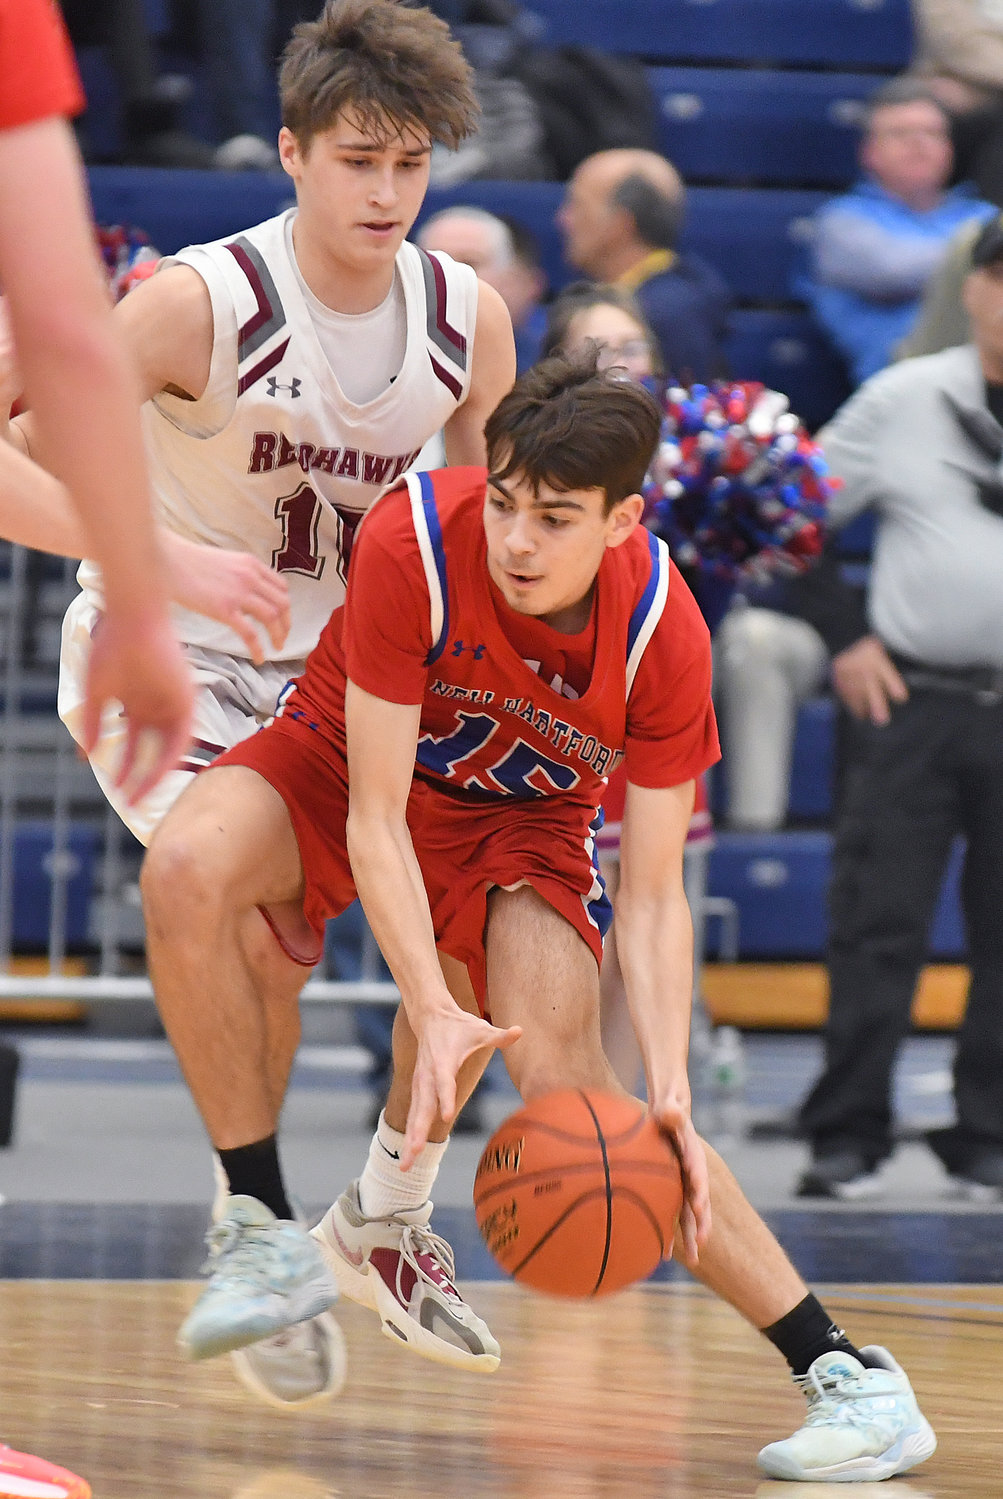 New Hartford's Jameson Stockwell tries to make a move against Central Square's Shane Bergquist in the second half Sunday night at SRC Arena. Stockwell had 15 points.